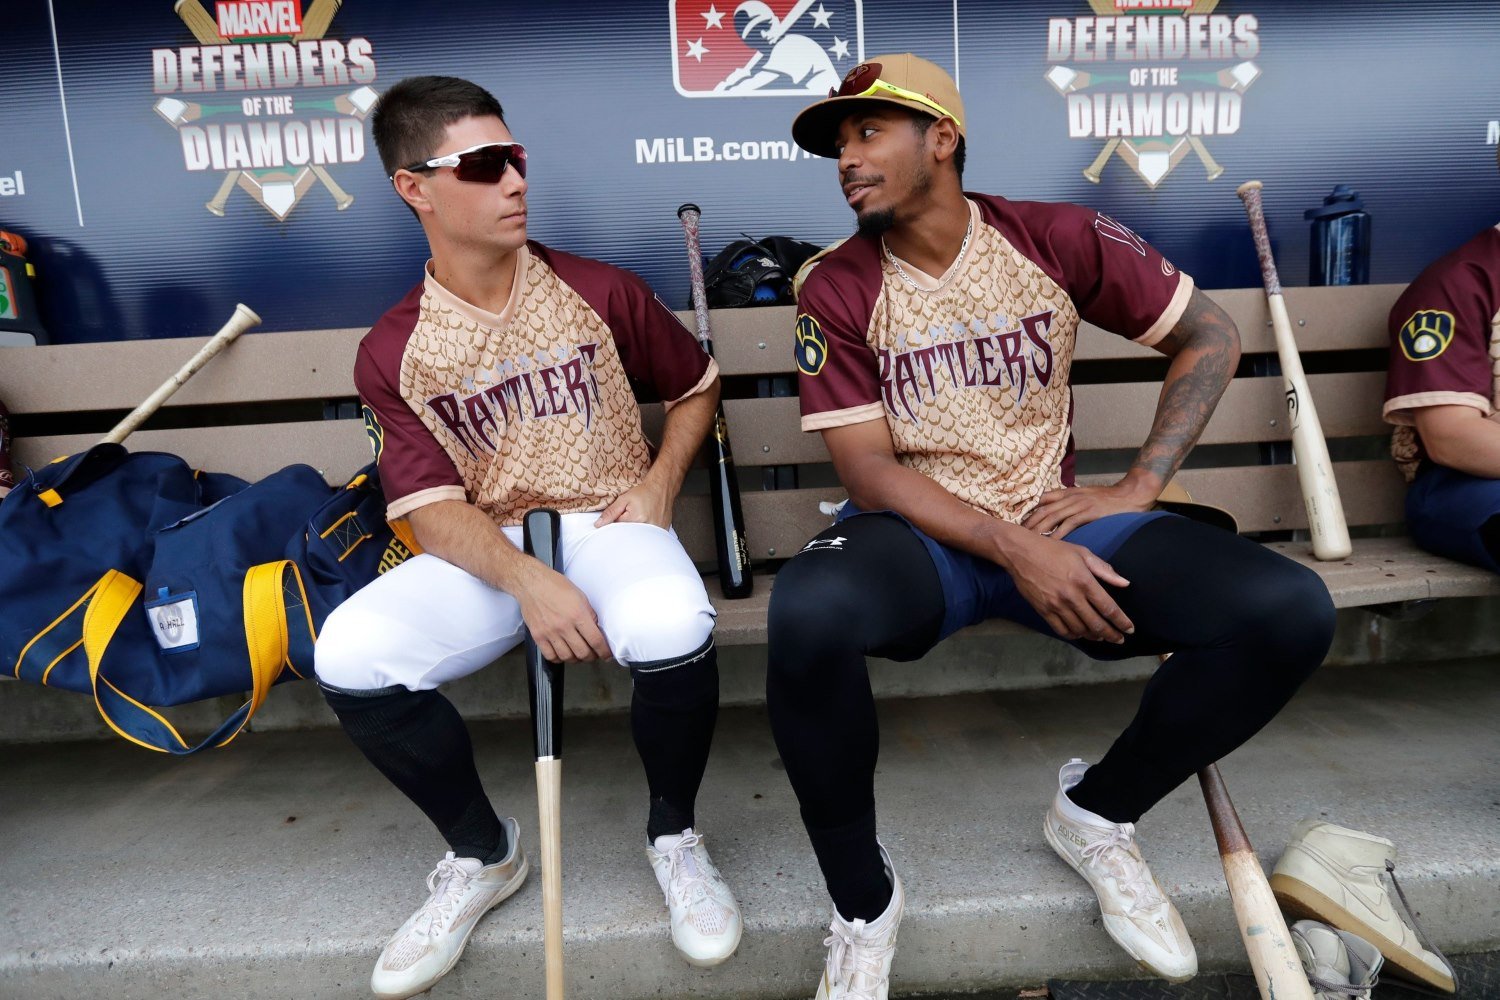 Rising star Brewers' system makes Timber Rattlers home debut